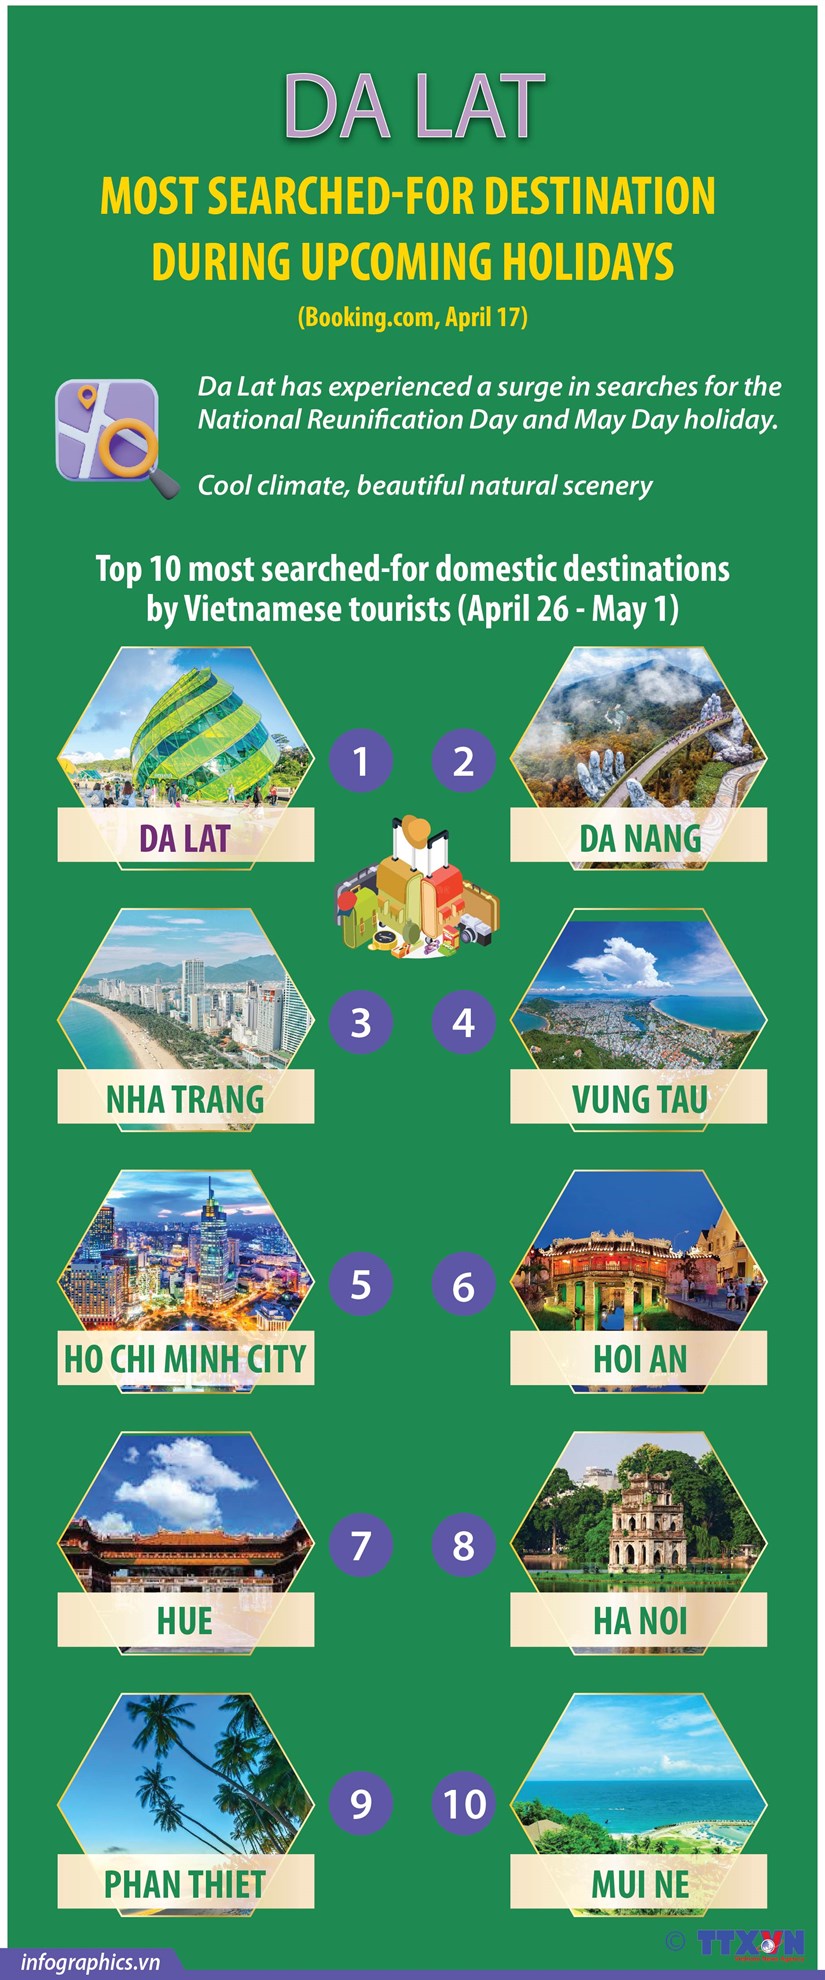 Da Lat most searched-for destination during upcoming holidays hinh anh 1